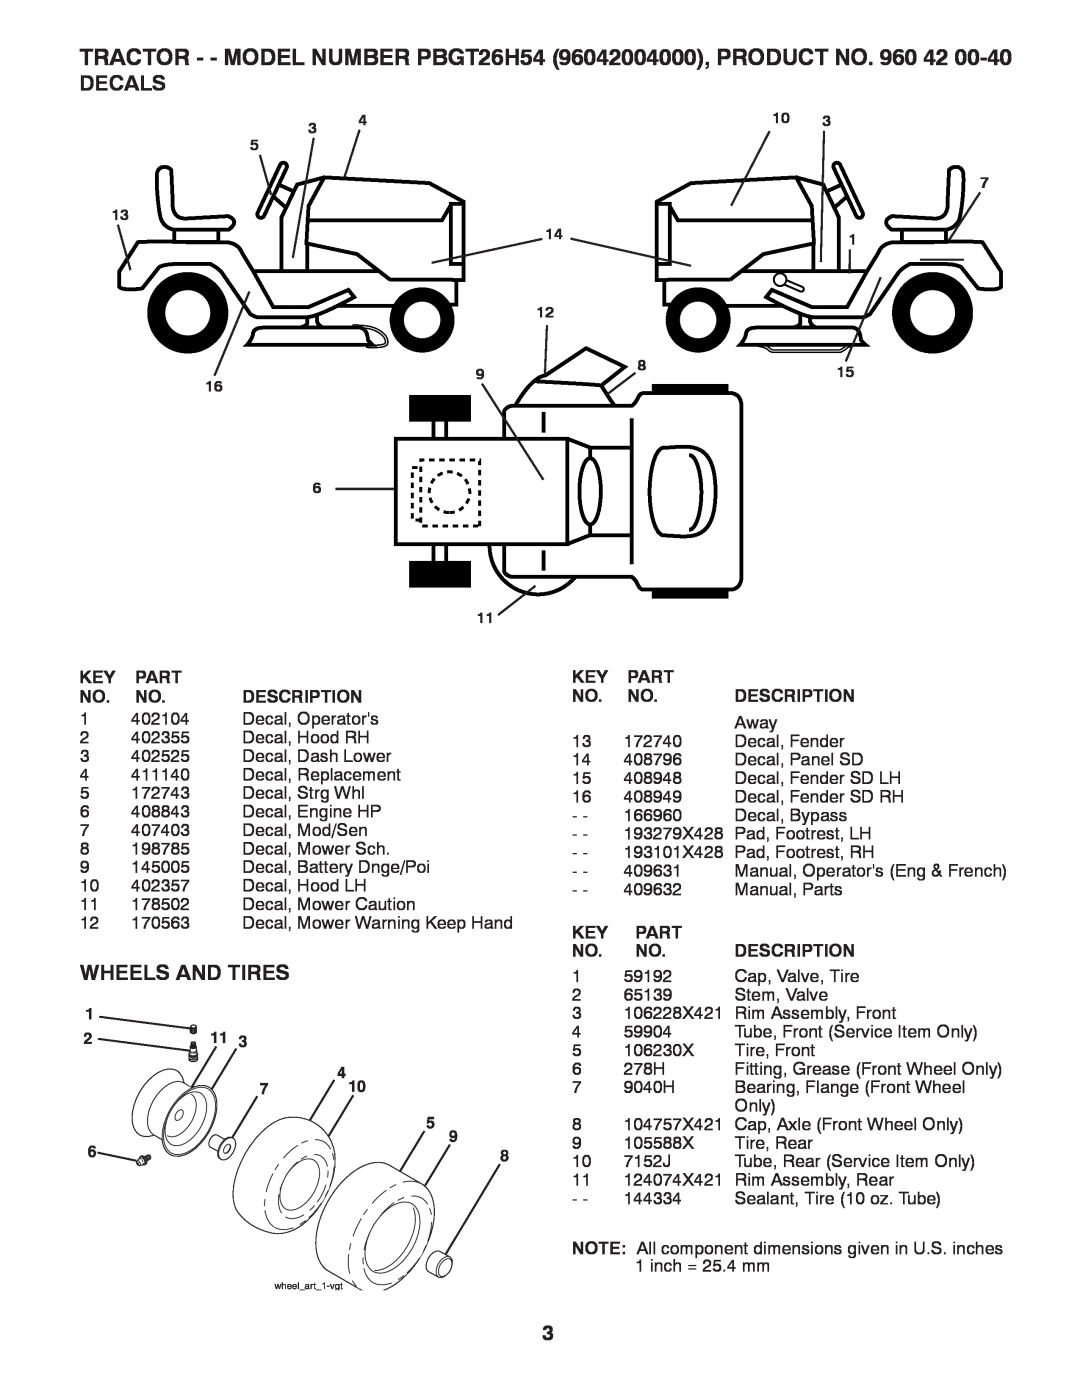 Poulan 409632 manual Decals, Wheels And Tires, TRACTOR - - MODEL NUMBER PBGT26H54 96042004000, PRODUCT NO. 960 